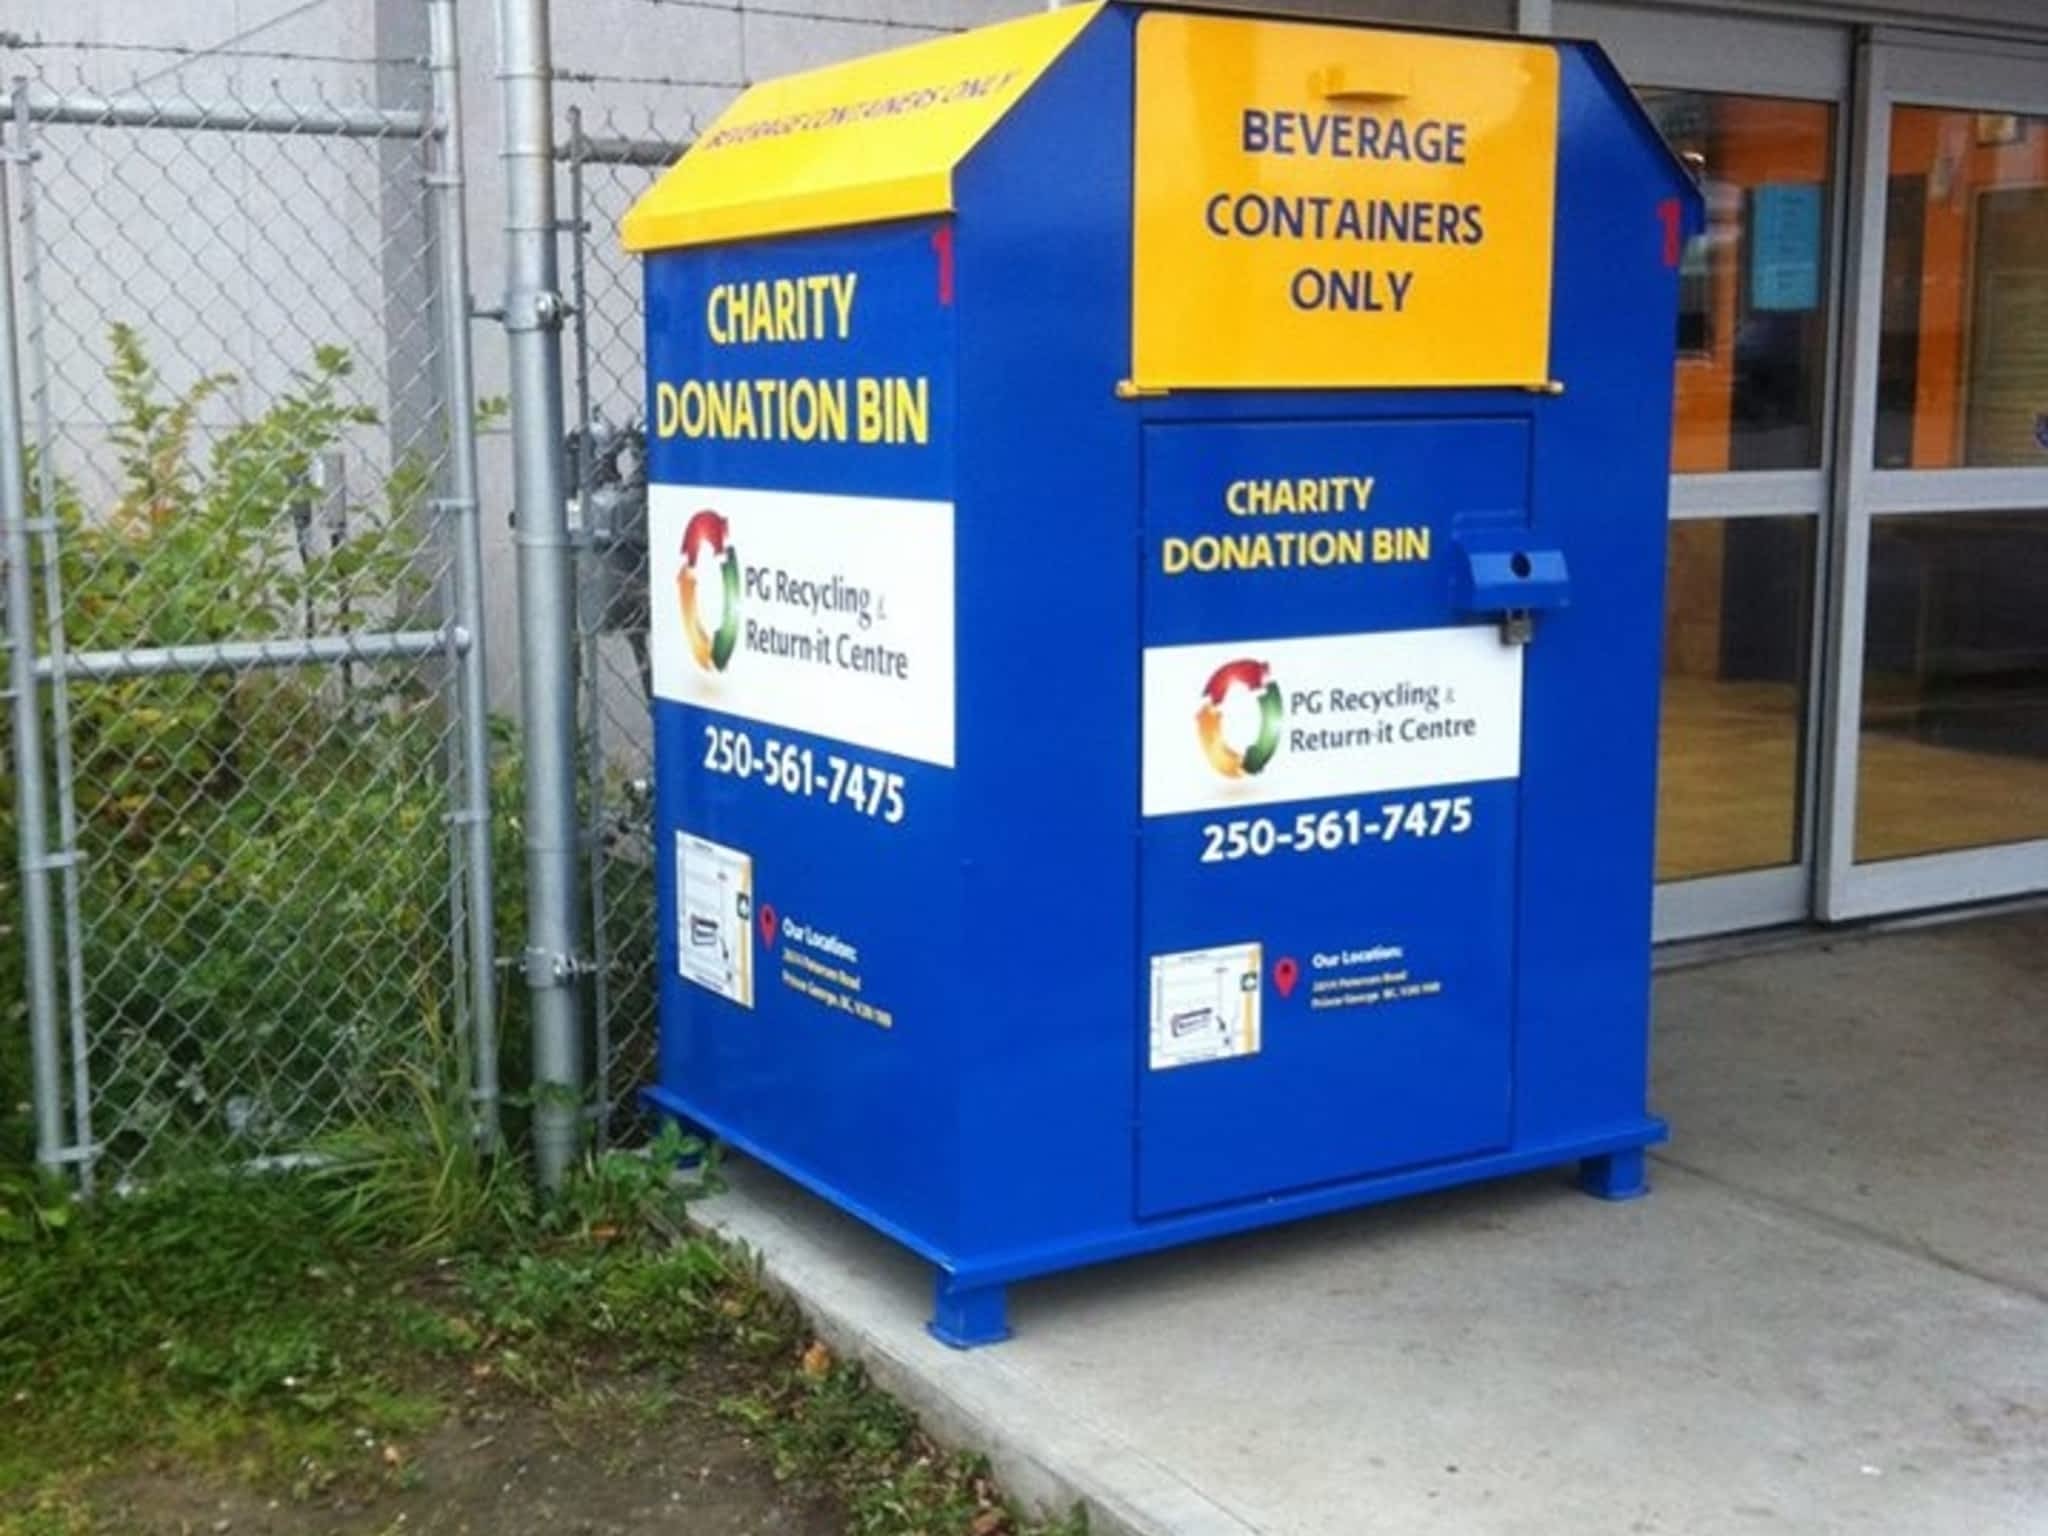 photo Prince George Recycling & Return-it Centre